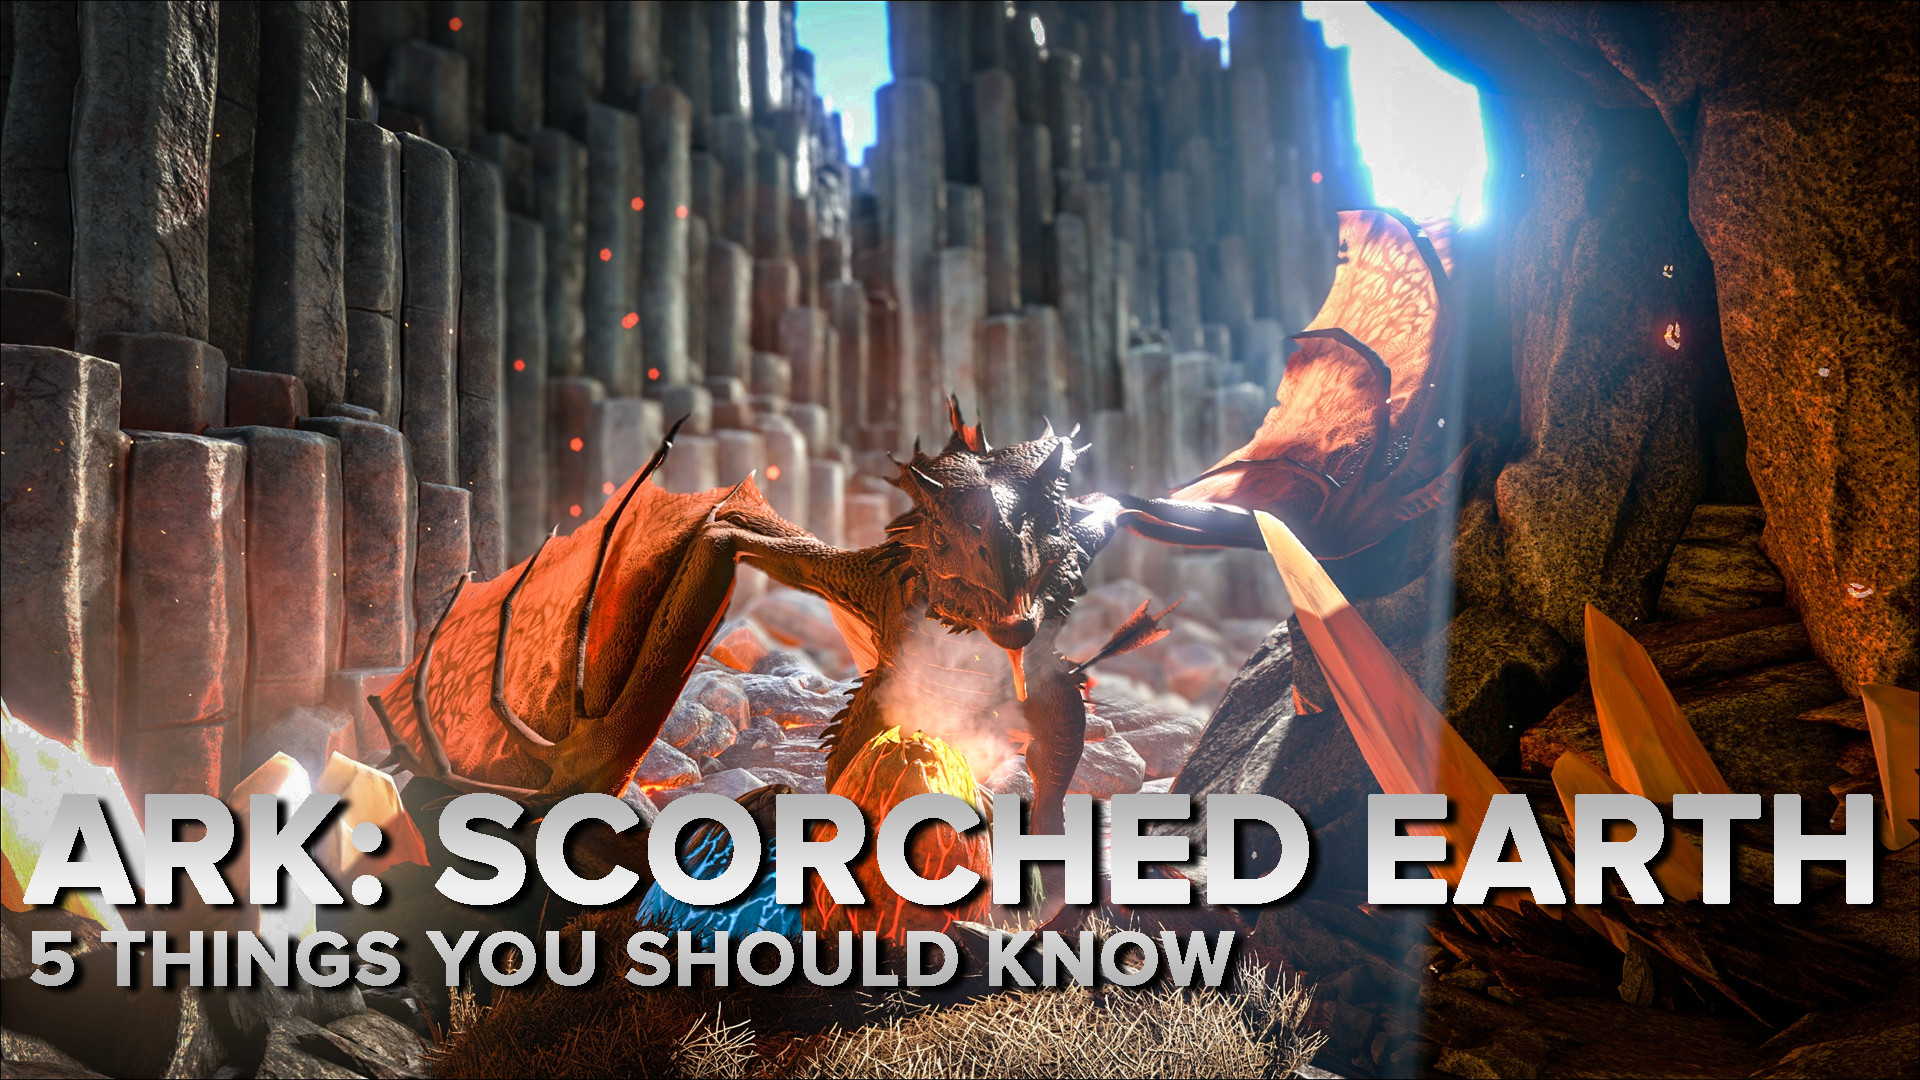 Scorched Earth Style Games